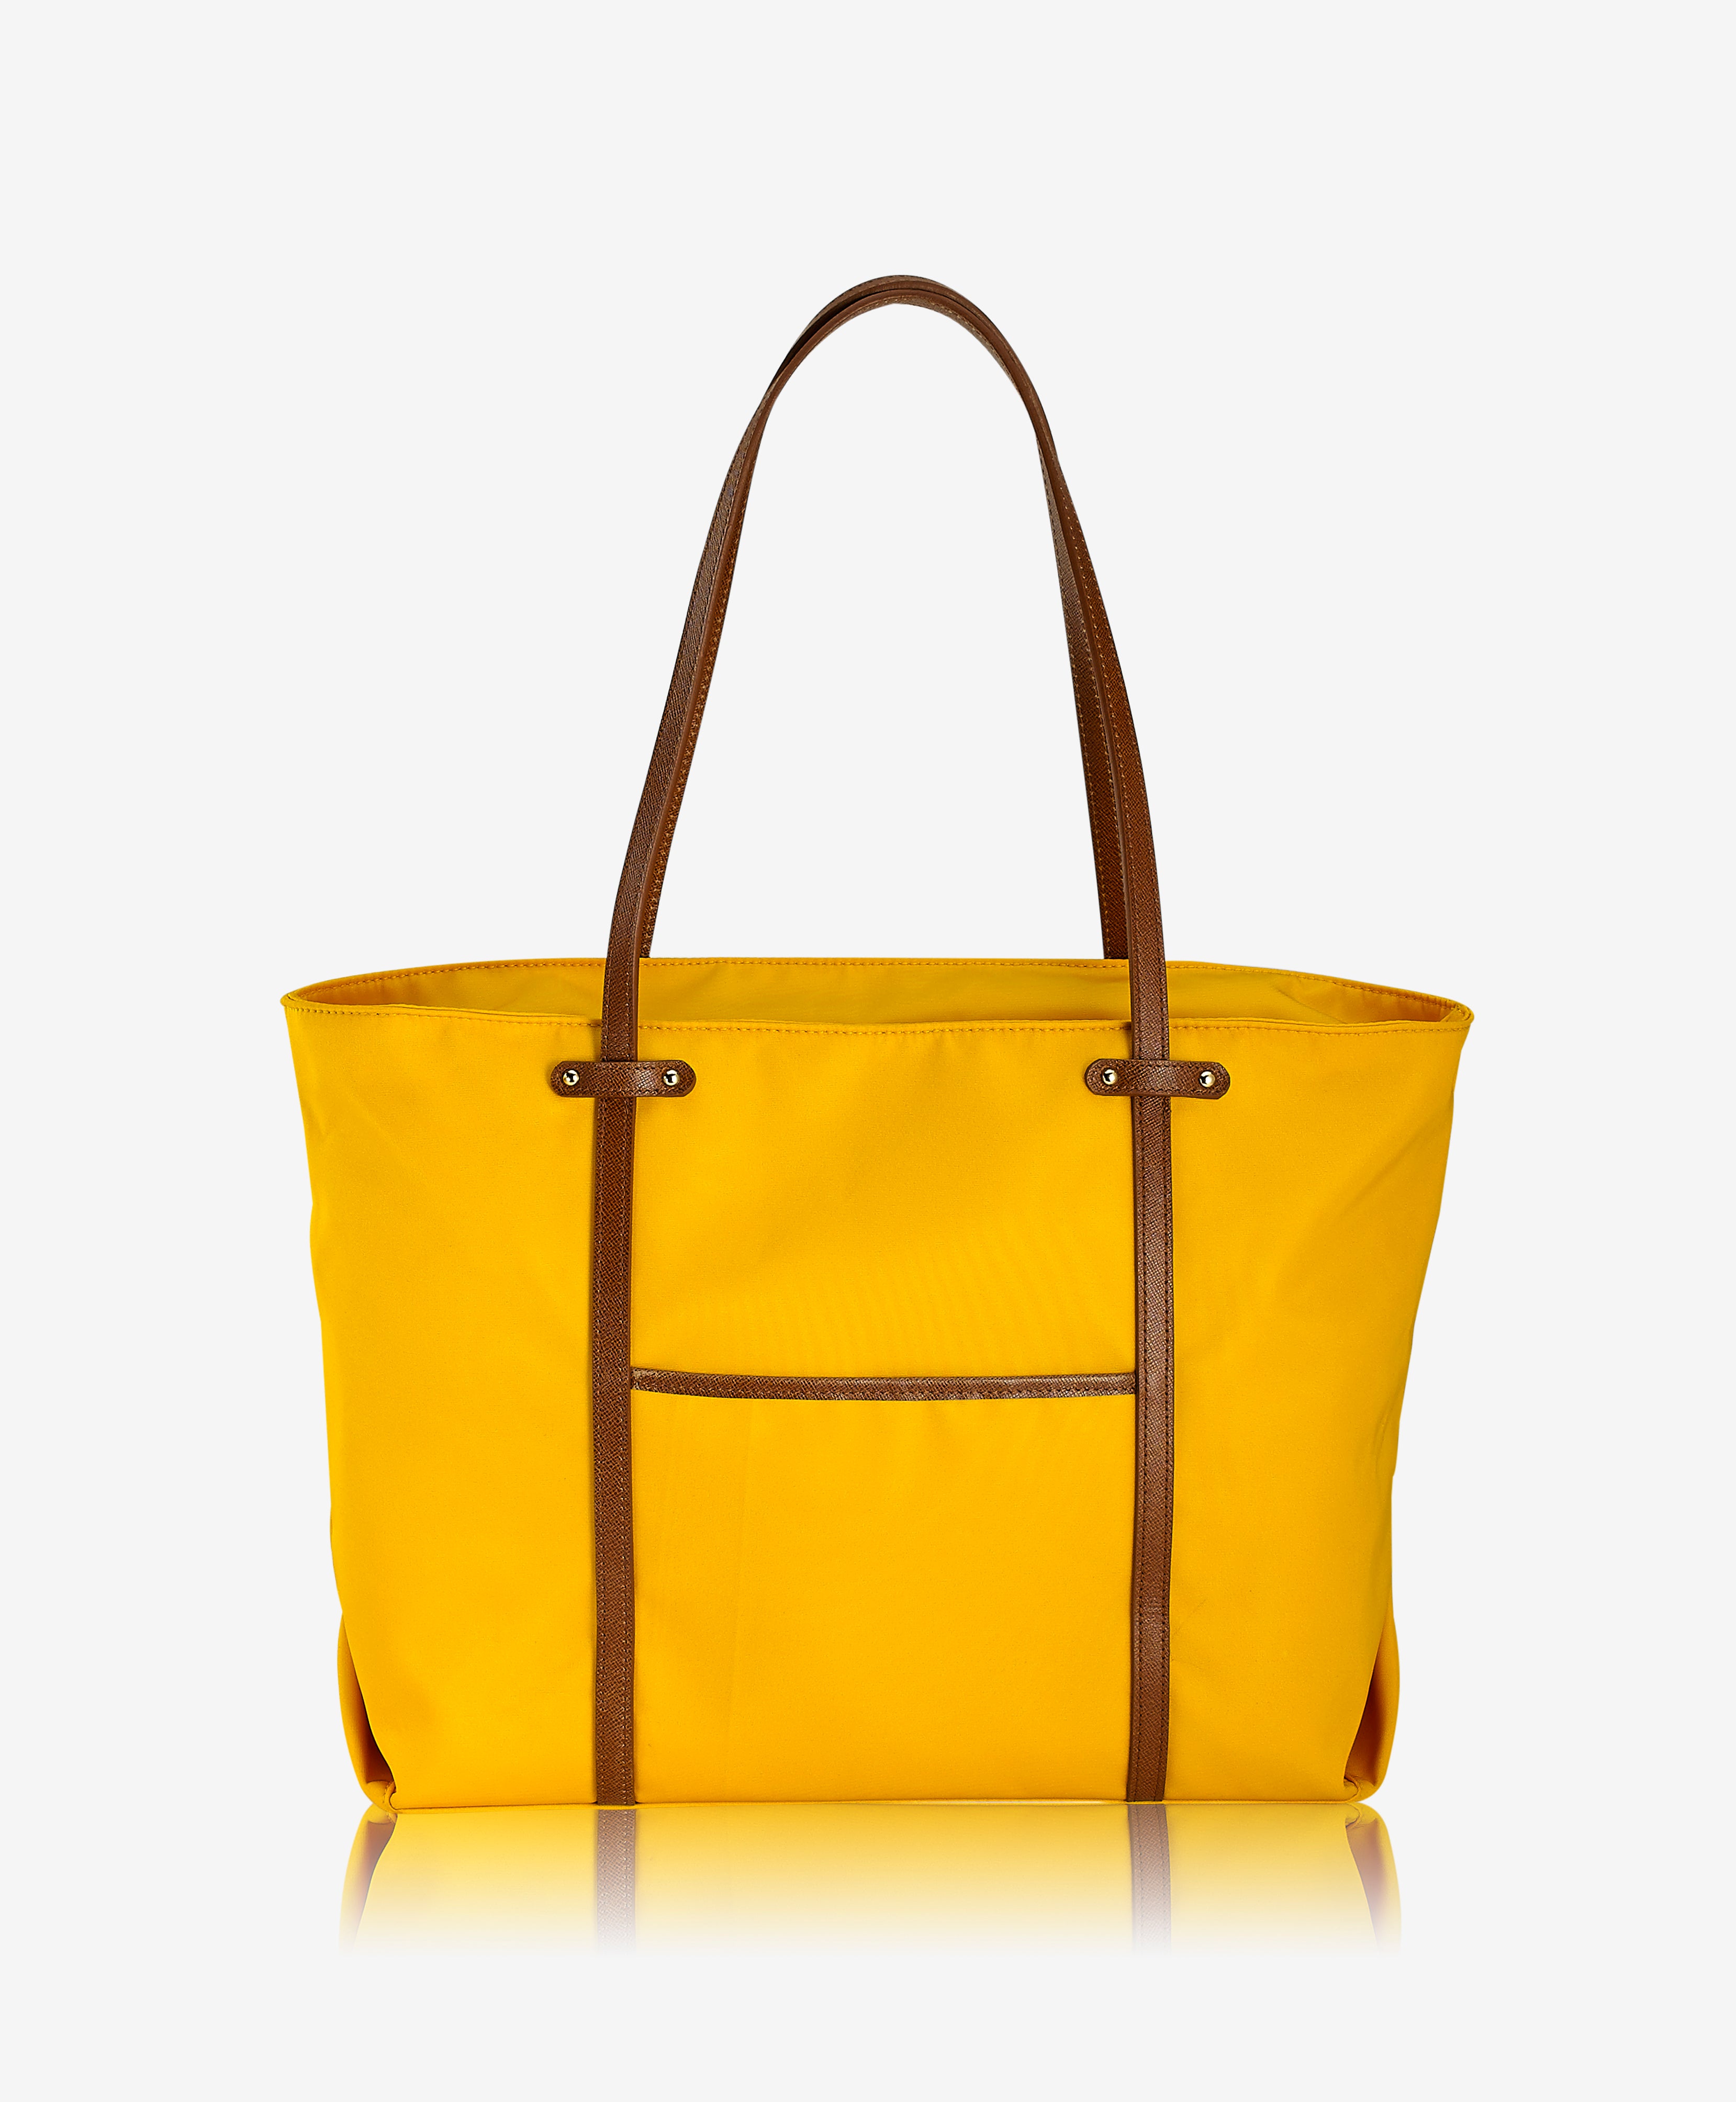 LOUIS VUITTON Bags & Handbags Sale and Outlet - 1800 discounted